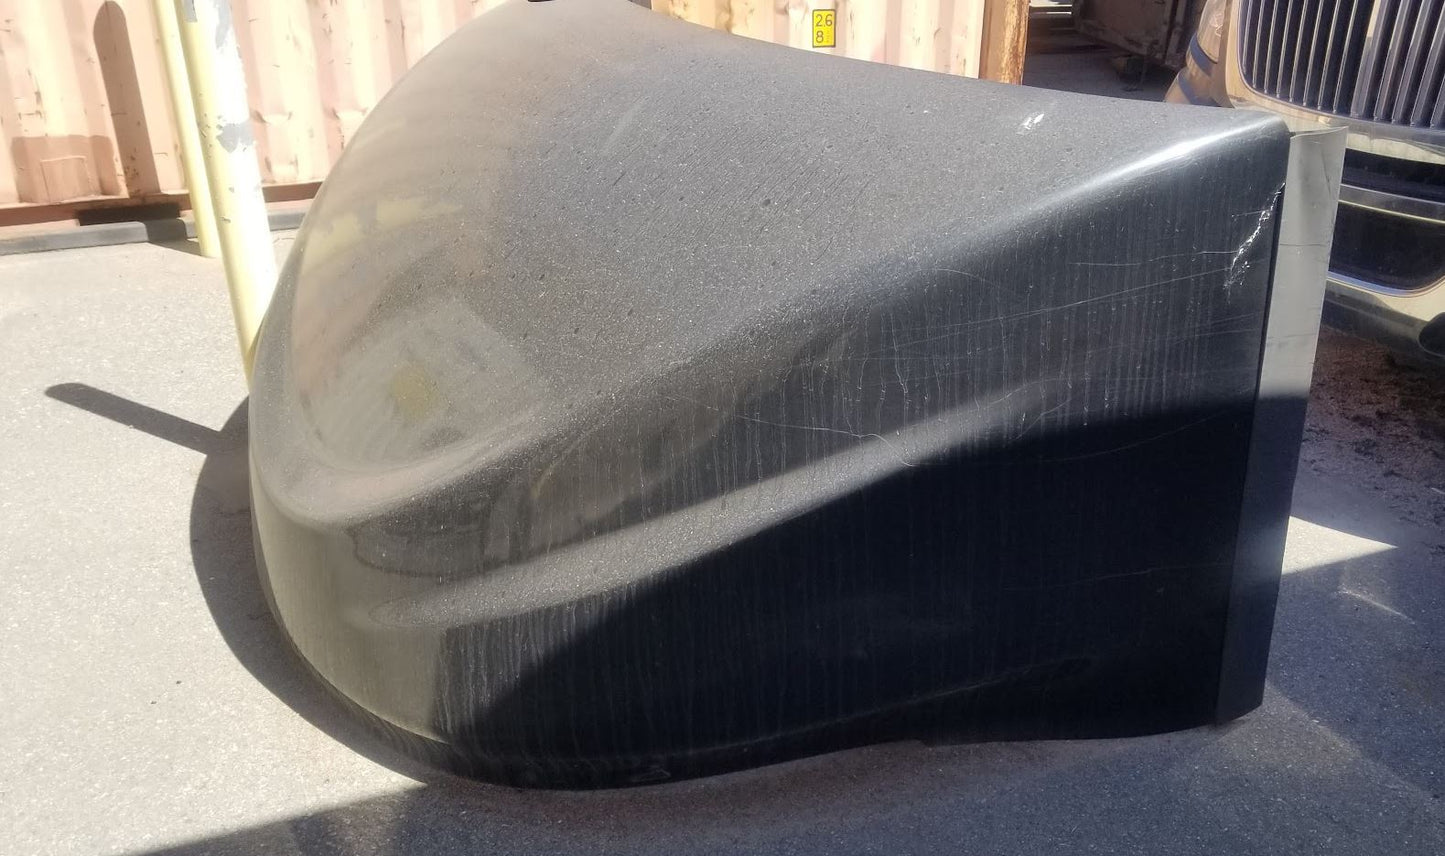 ROOF FAIRING FITS 2016 PROSTAR DAYCAB